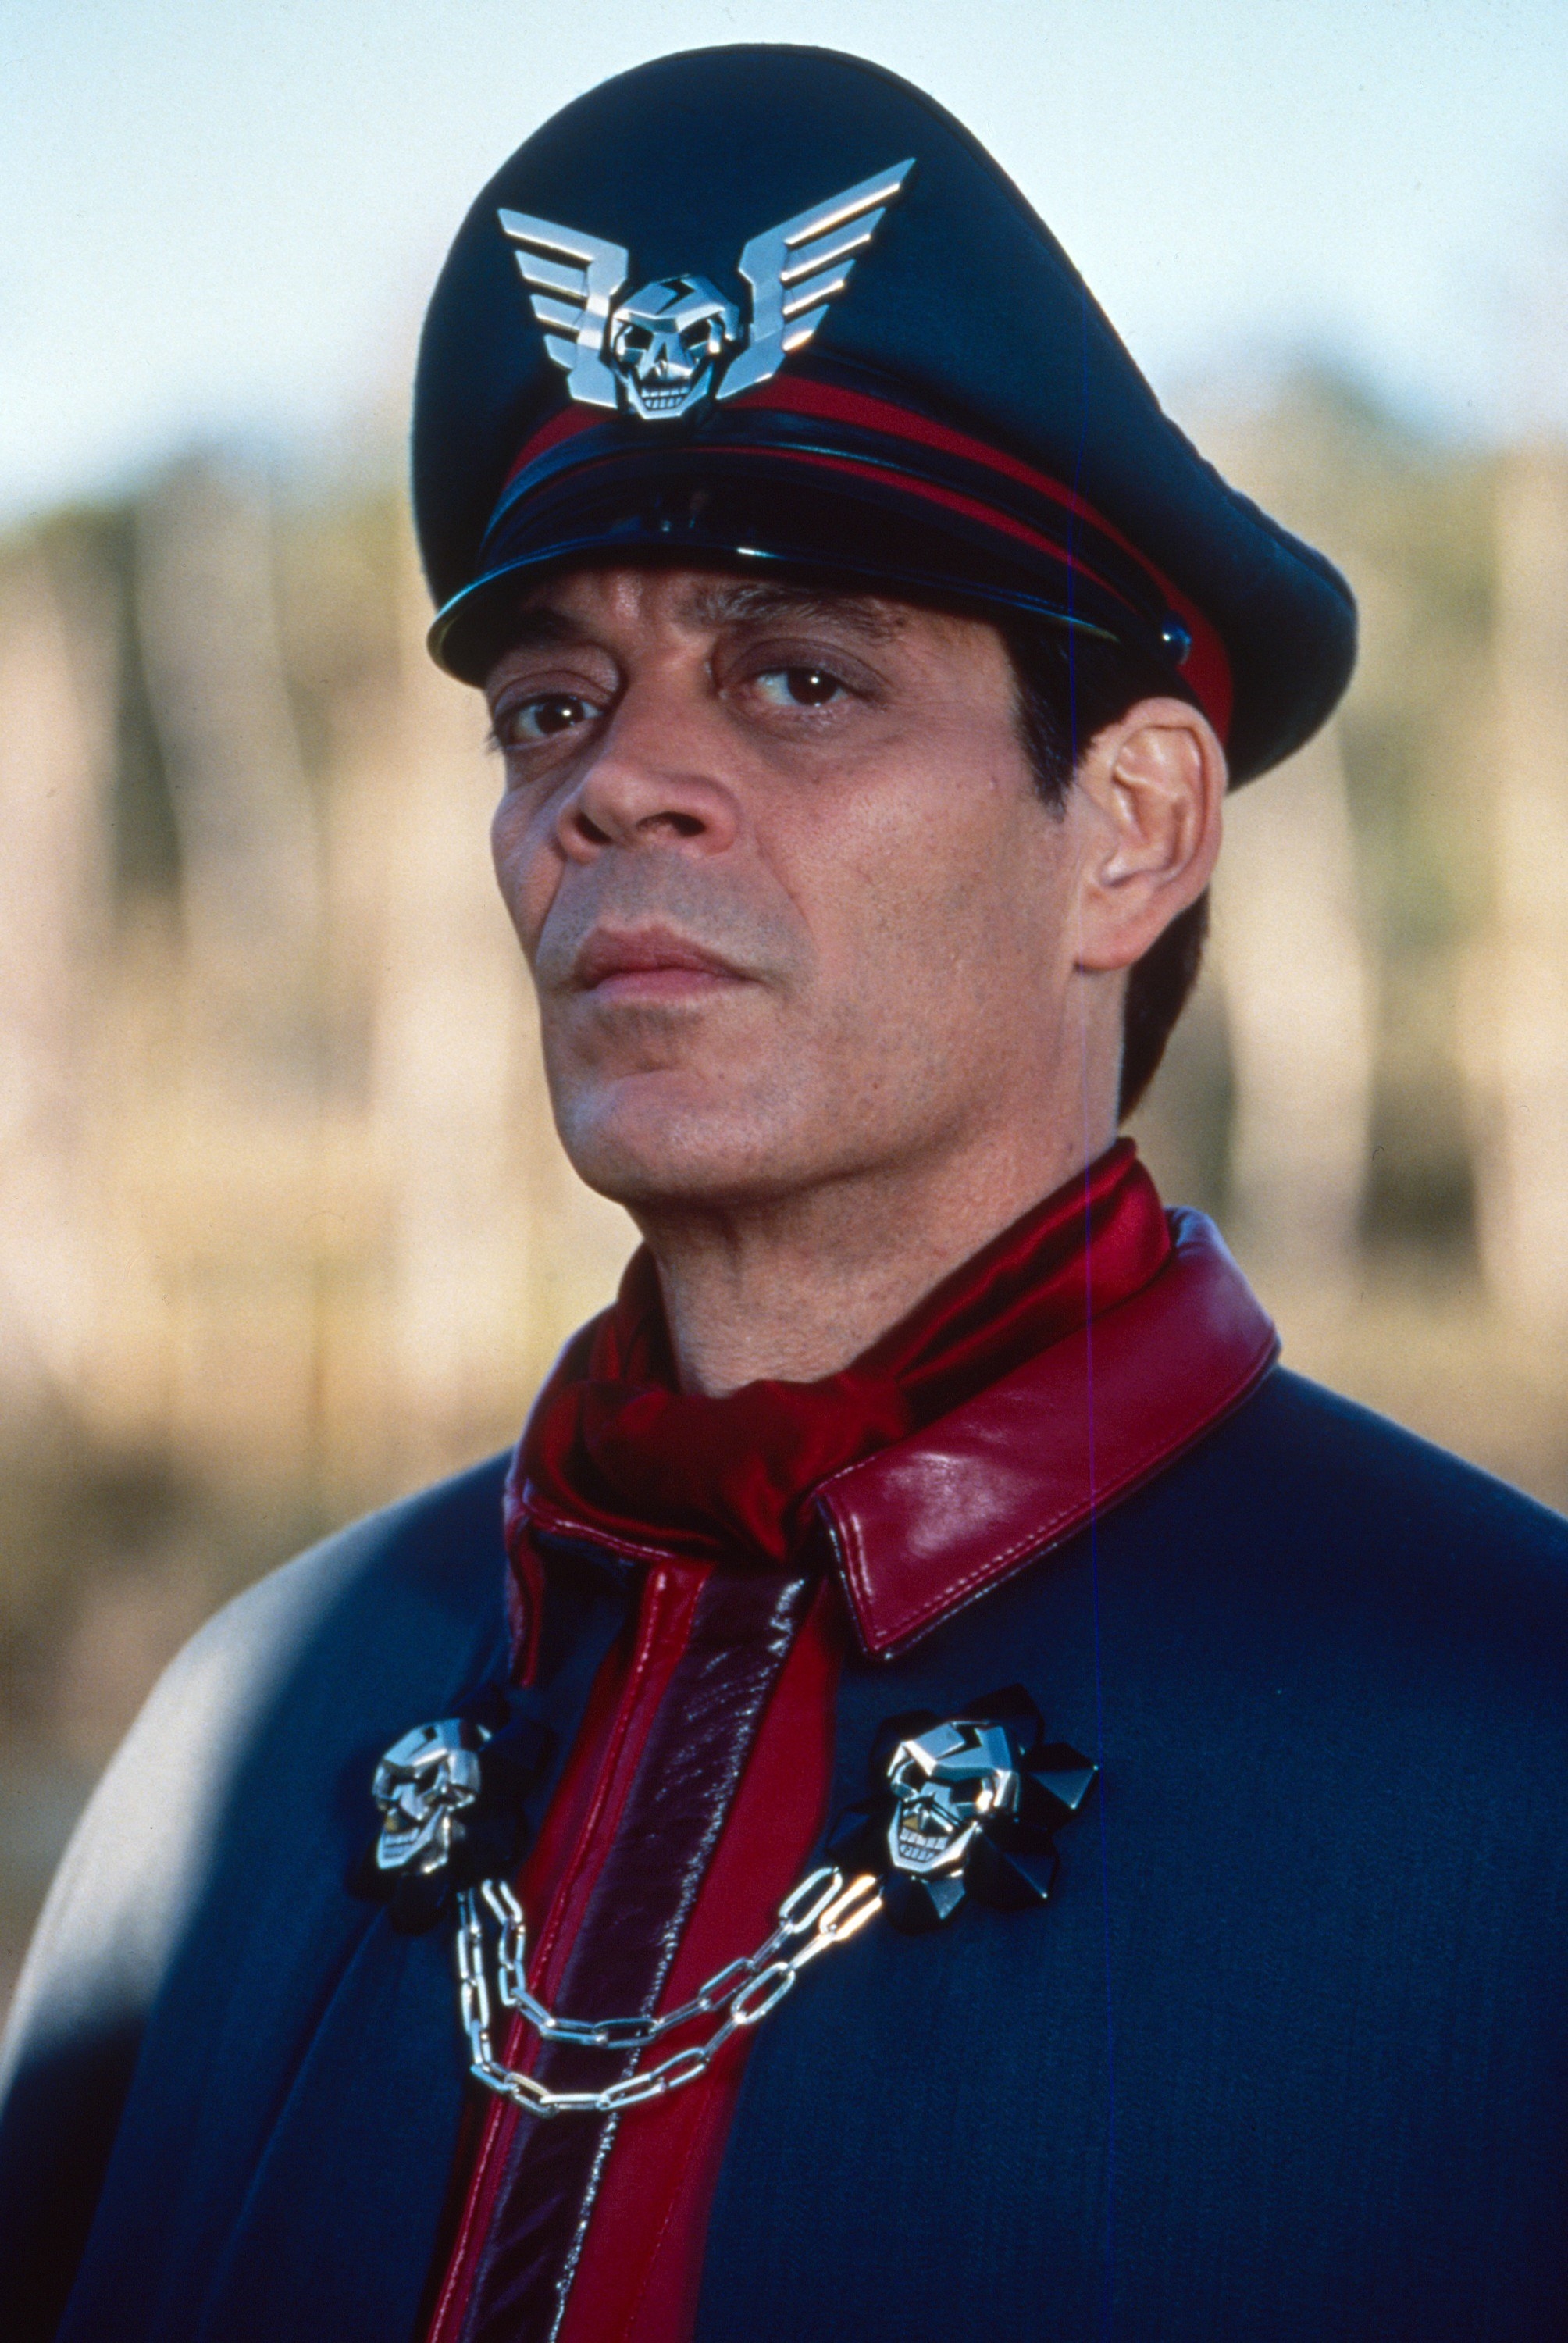 Raul as M Bison